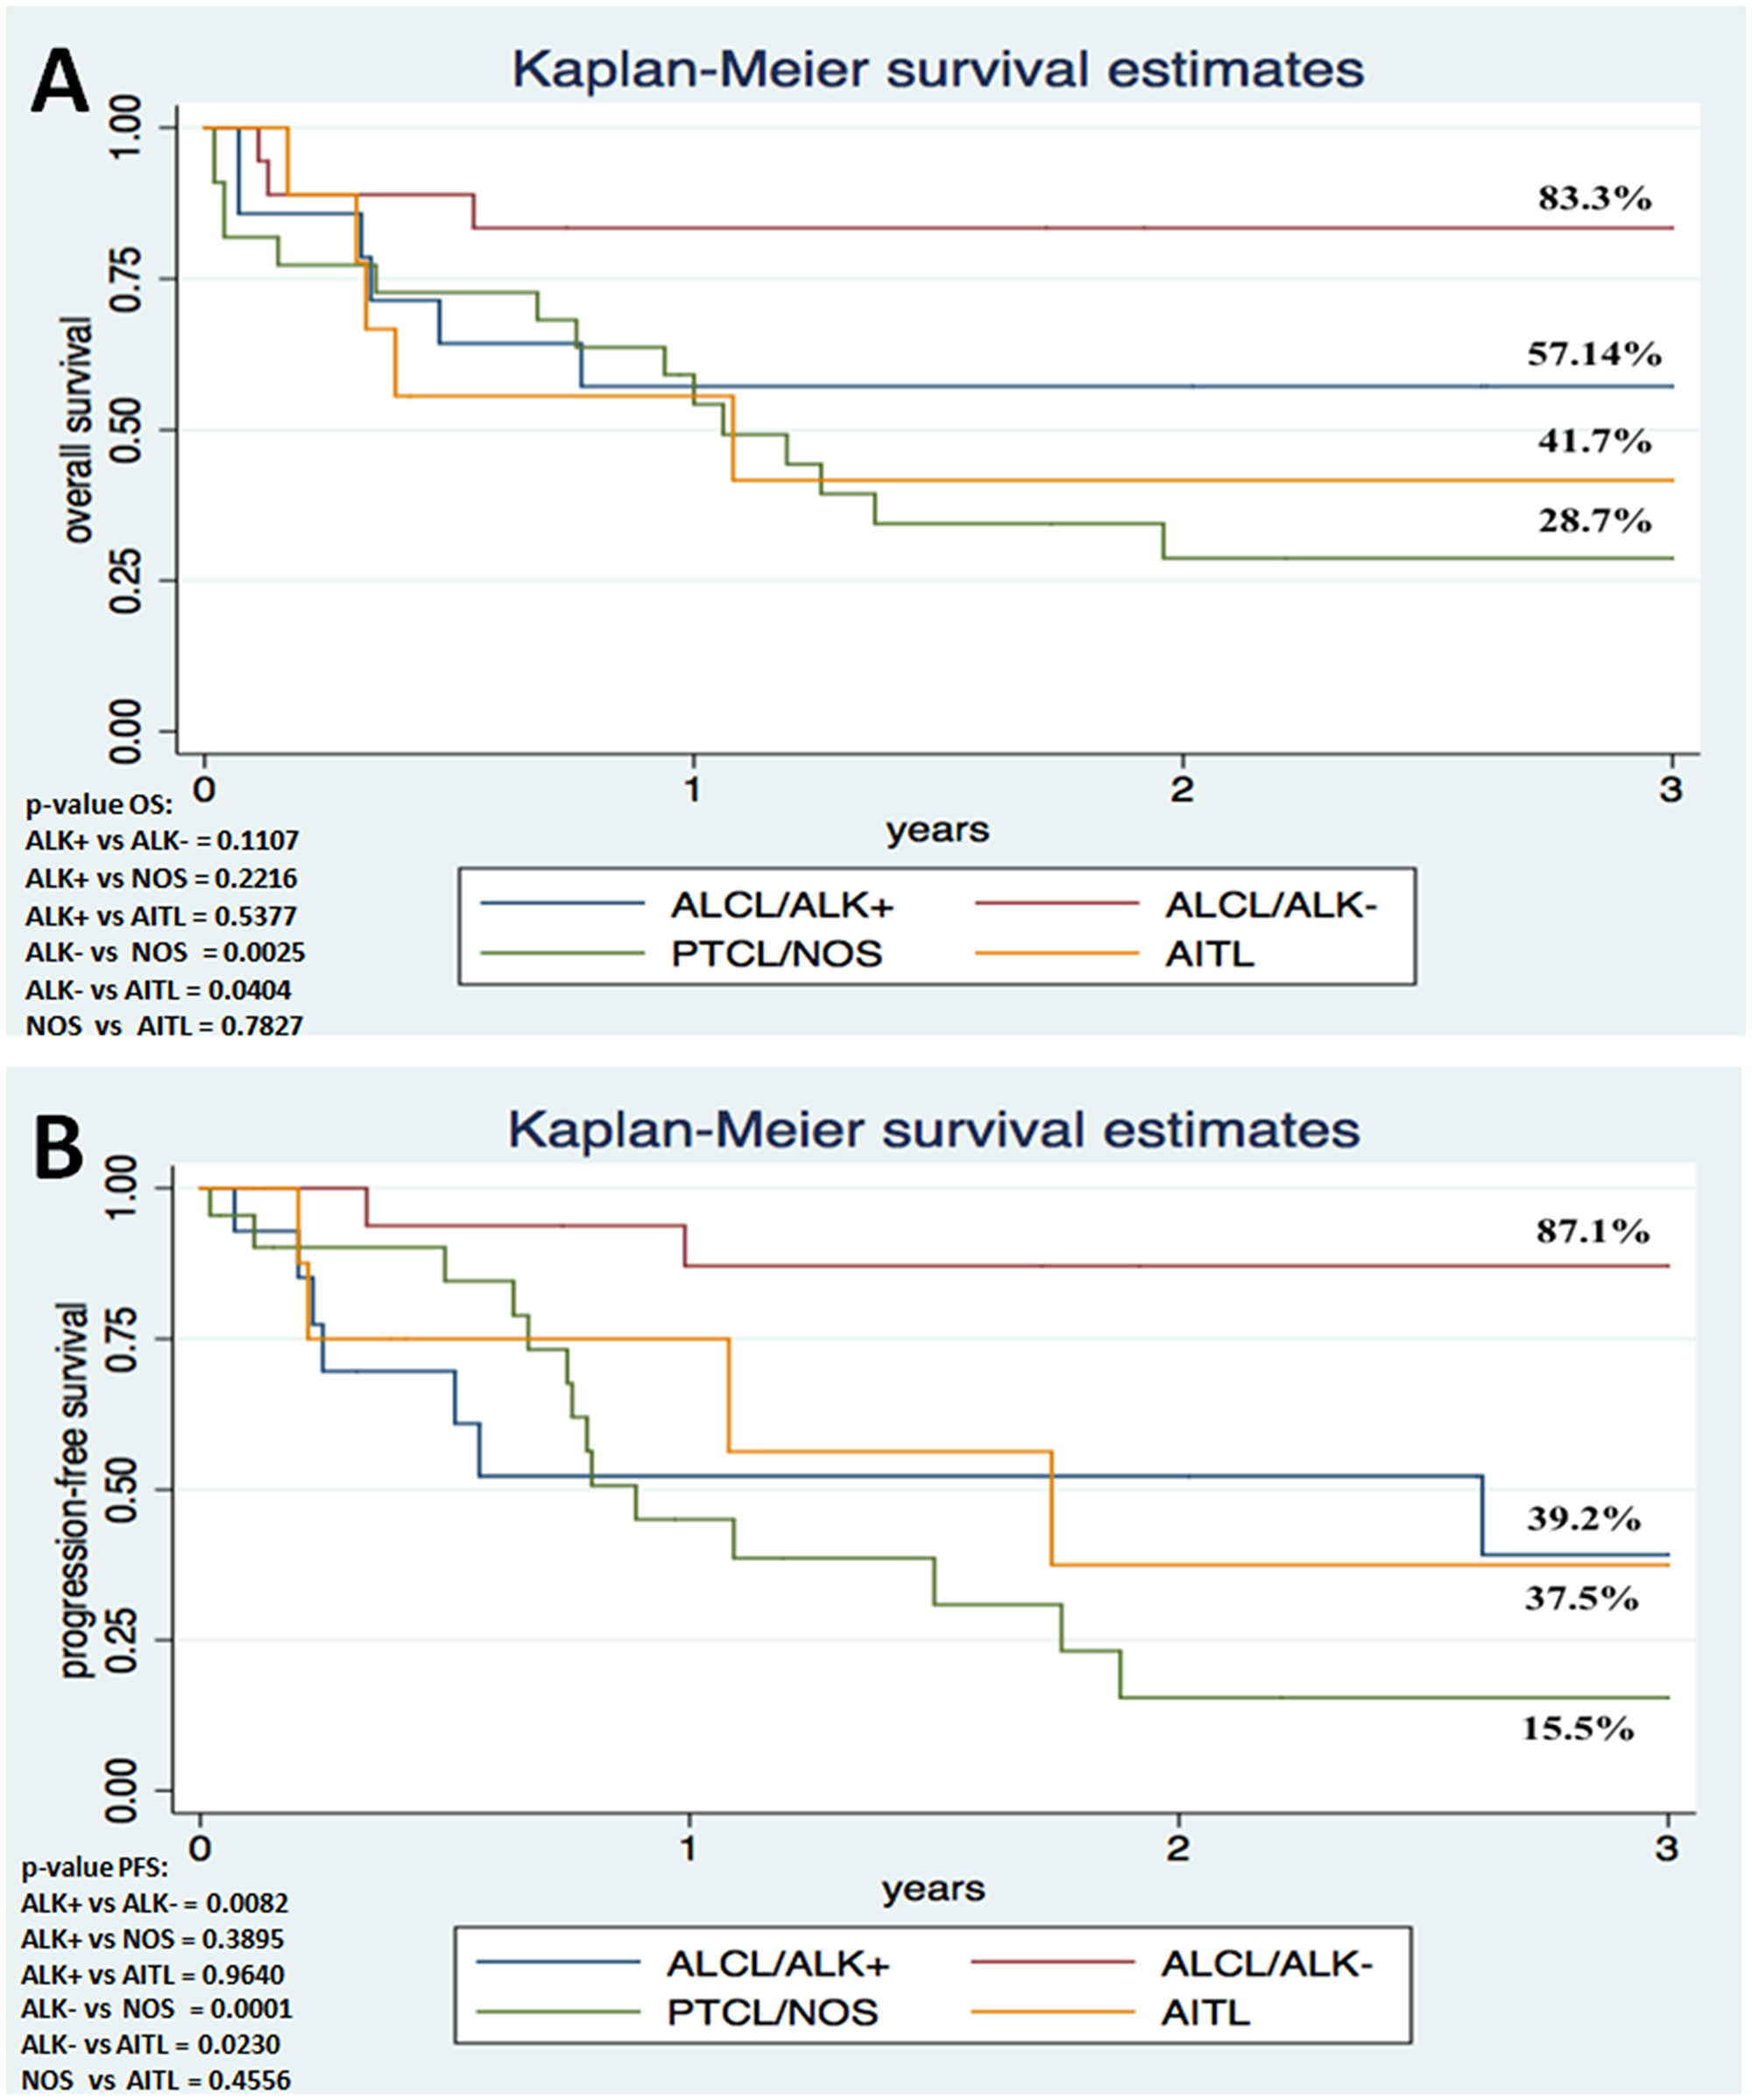 Survival analysis shows poor outcome in ALCL patients with ALK1 immunoexpression in comparison to individuals lacking ALK1 expression.